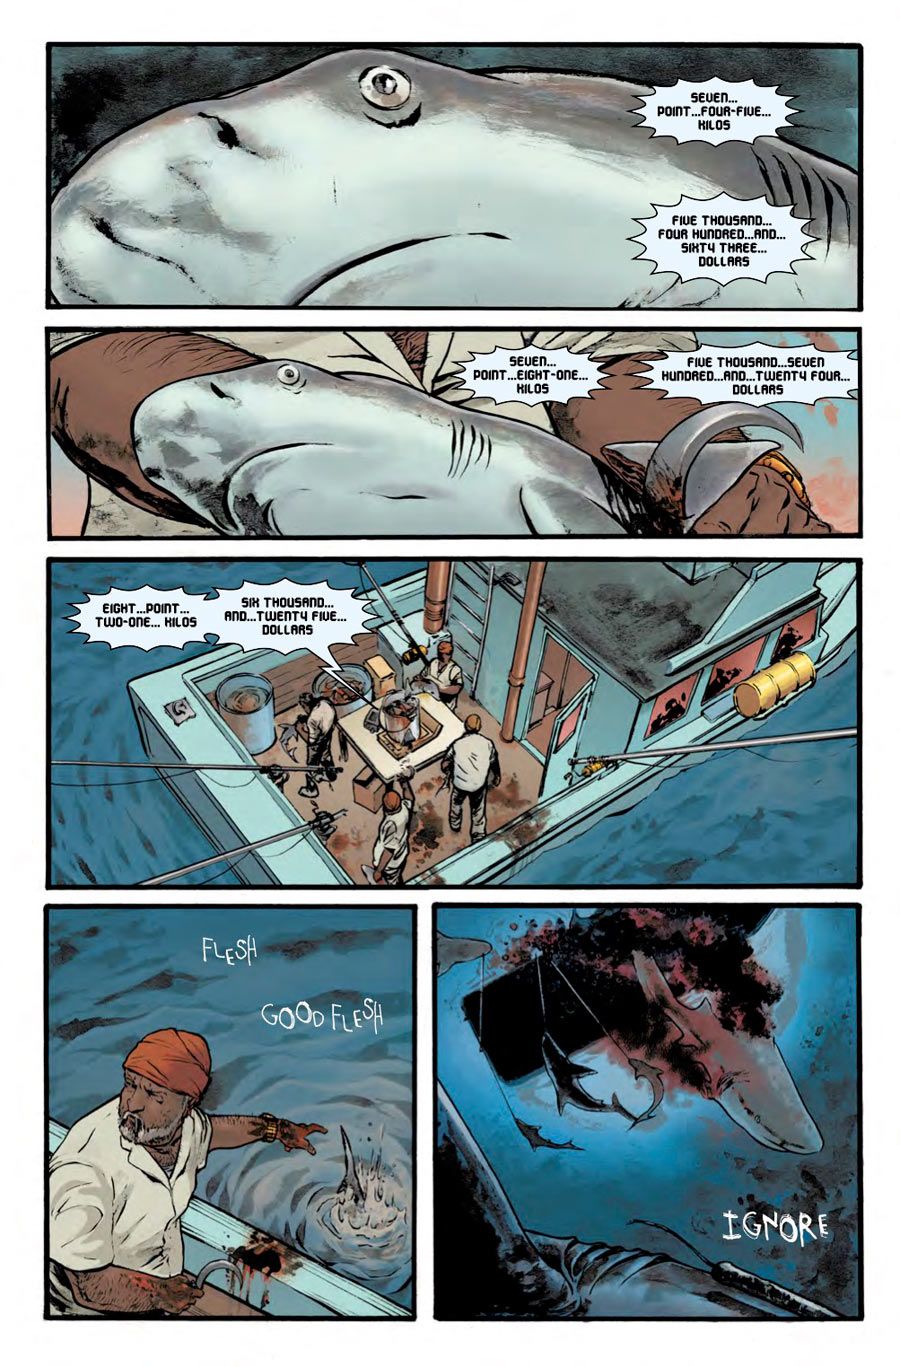 hook_jaw_2_preview-1